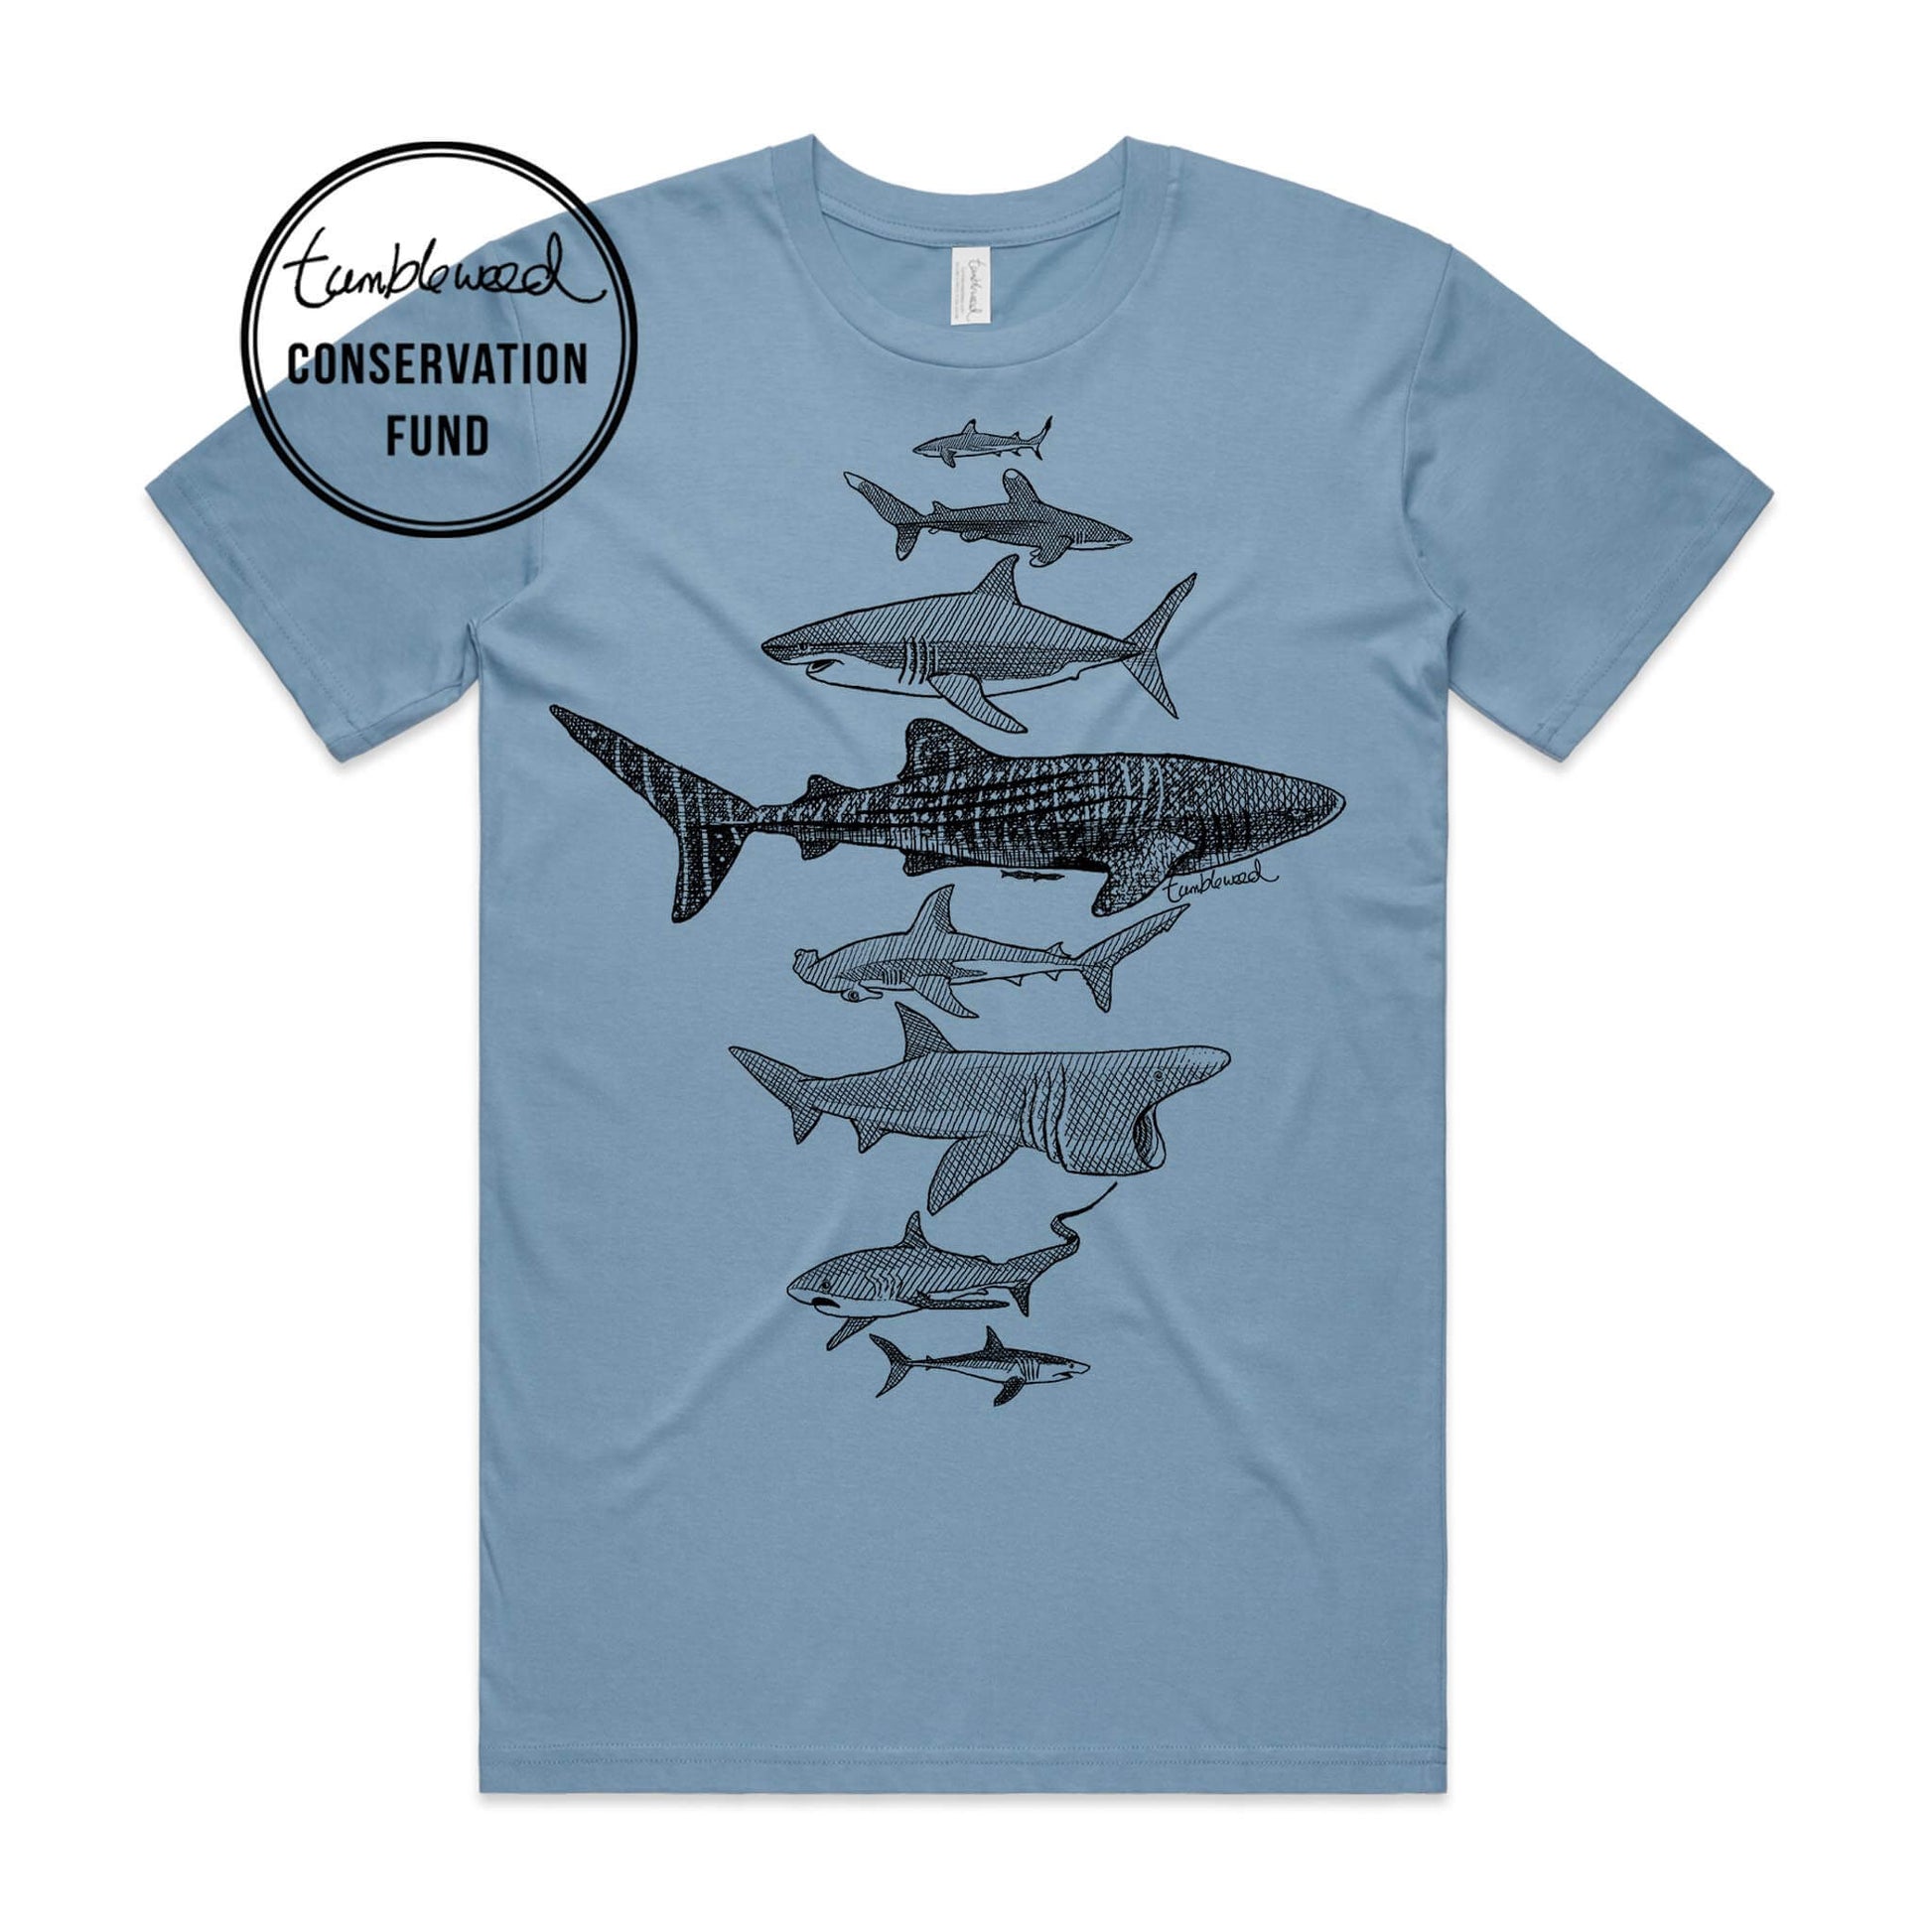 Sage, female t-shirt featuring a screen printed Sharks design.